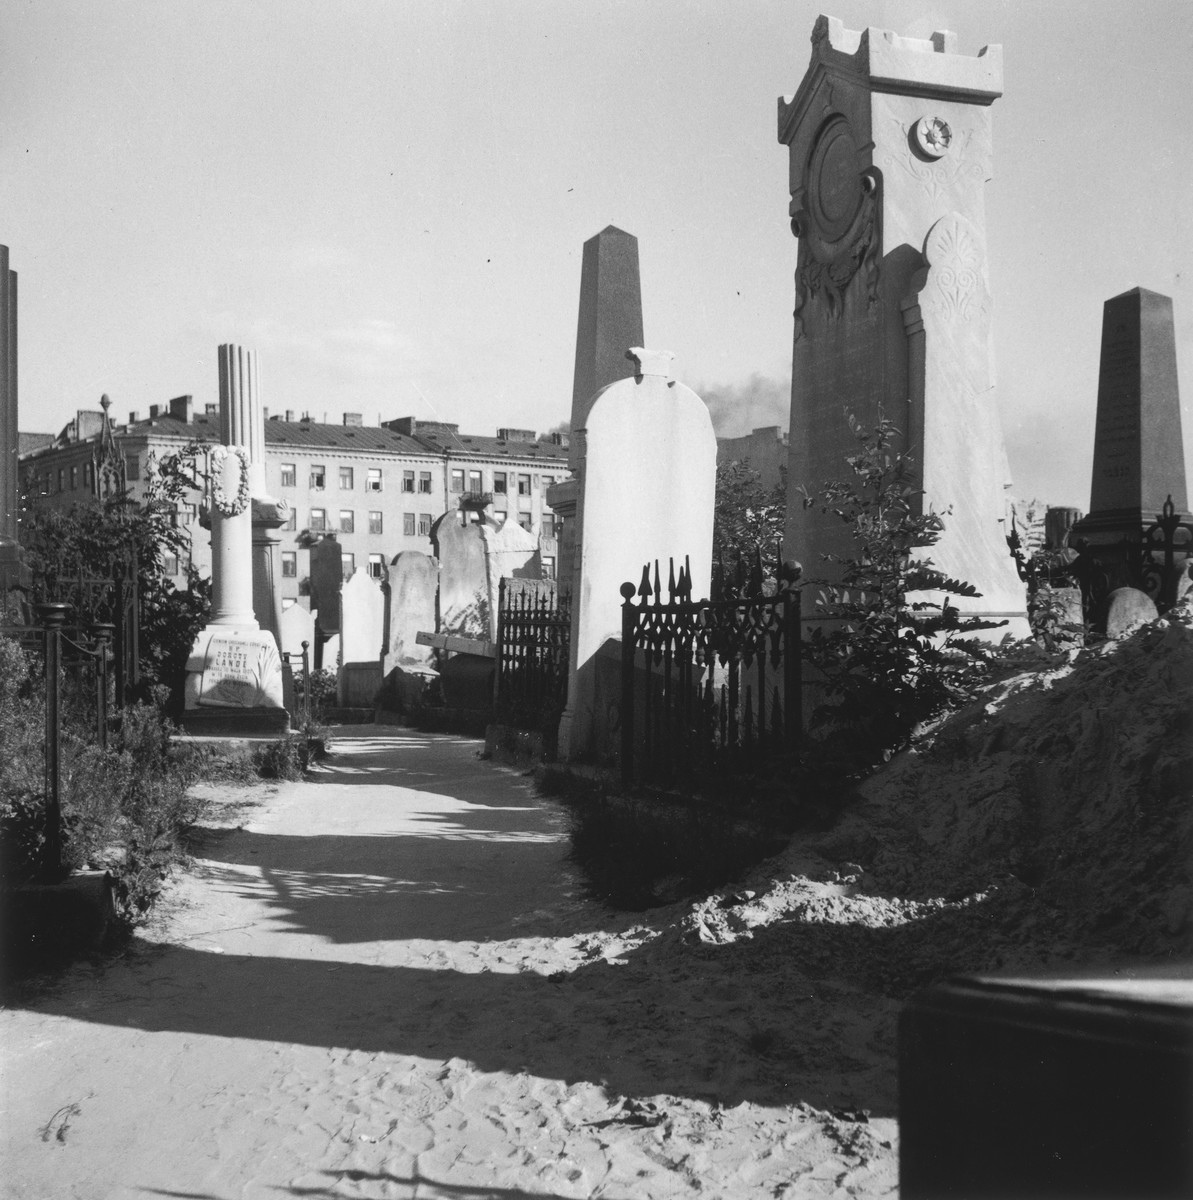 The Jewish cemetery in the Warsaw ghetto.

Joest's original caption reads: "Then the grave was covered over with earth.  Alongside were the graves of rich families, their well-kept tombstones engraved with Hebrew and Latin lettering, describing the dead."